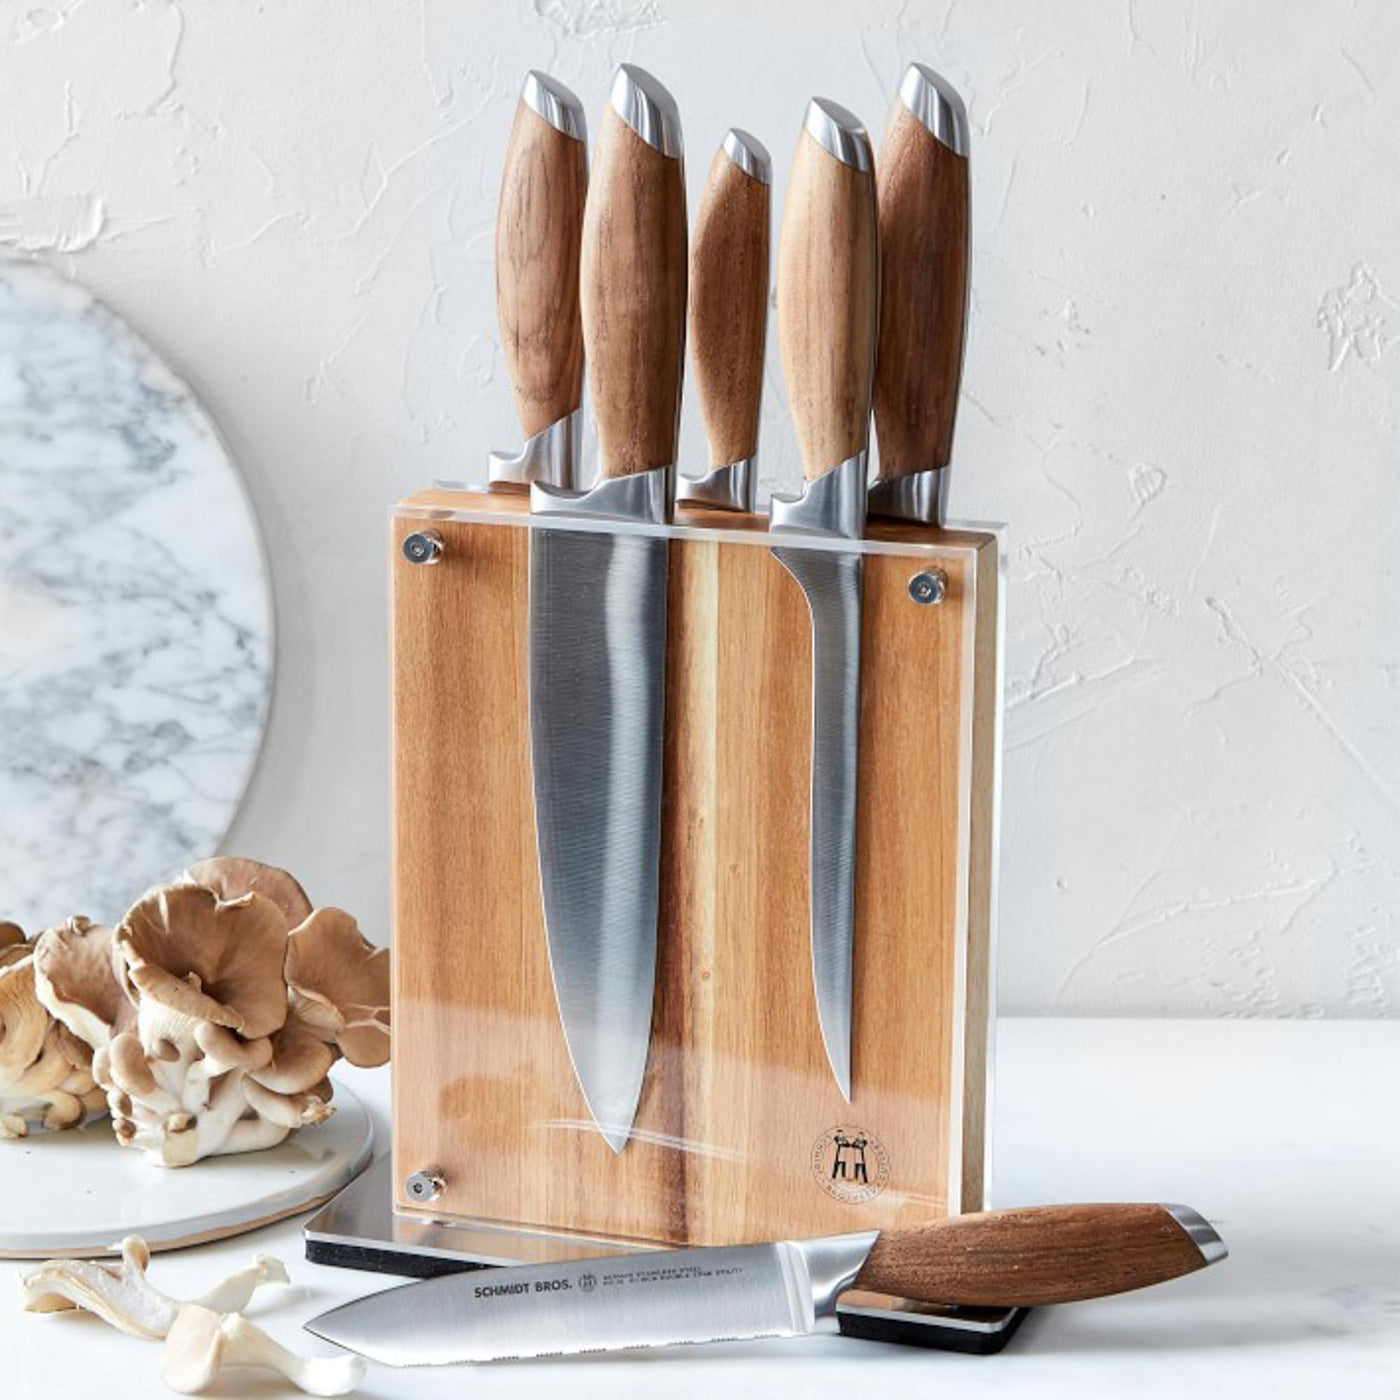 https://schmidtbrothers.com/cdn/shop/products/schmidt-brothers-kitchen-cutlery-schmidt-brothers-bonded-teak-7-piece-knife-set-high-carbon-stainless-steel-cutlery-with-acacia-and-acrylic-magnetic-knife-block-28288503480381_1400x.jpg?v=1683912740